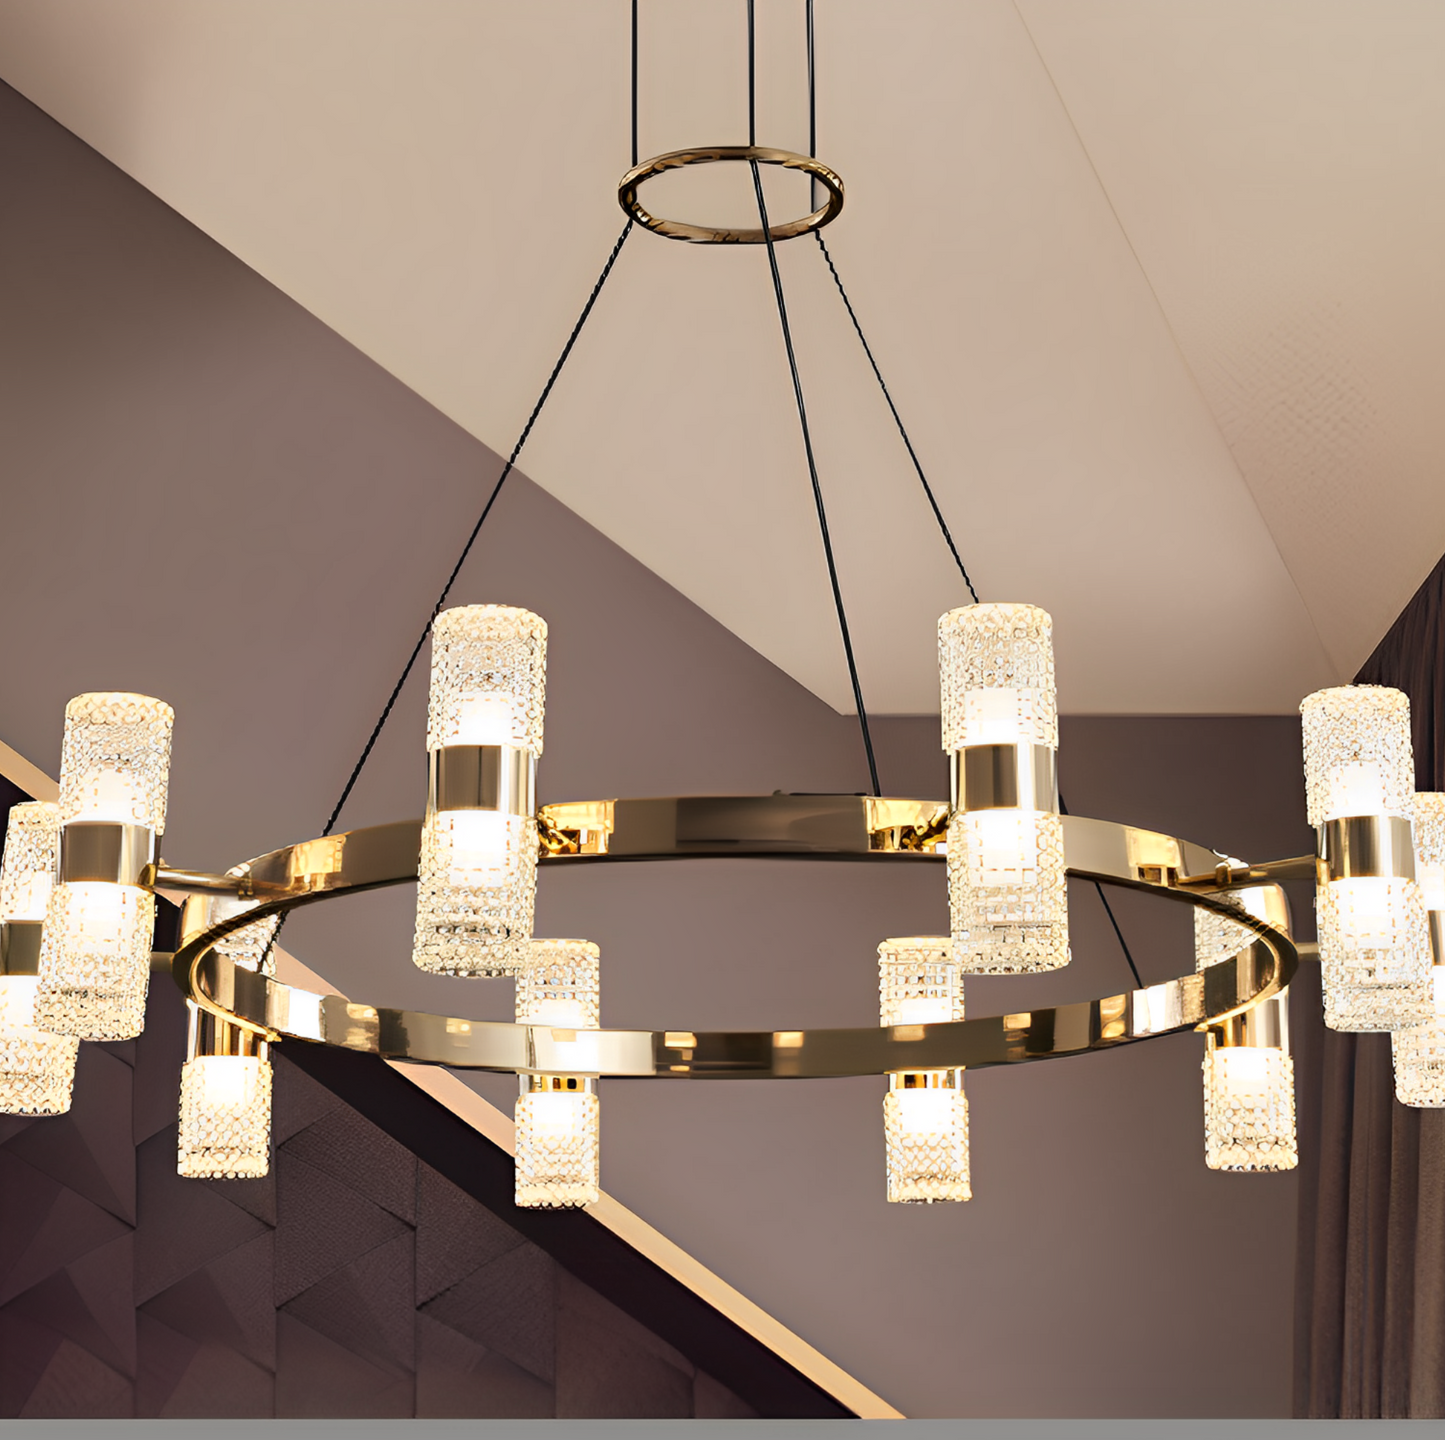 Load image into Gallery viewer, Aluminium Acrylic Led Crystal Chandelier by Gloss (P0715-10A)
